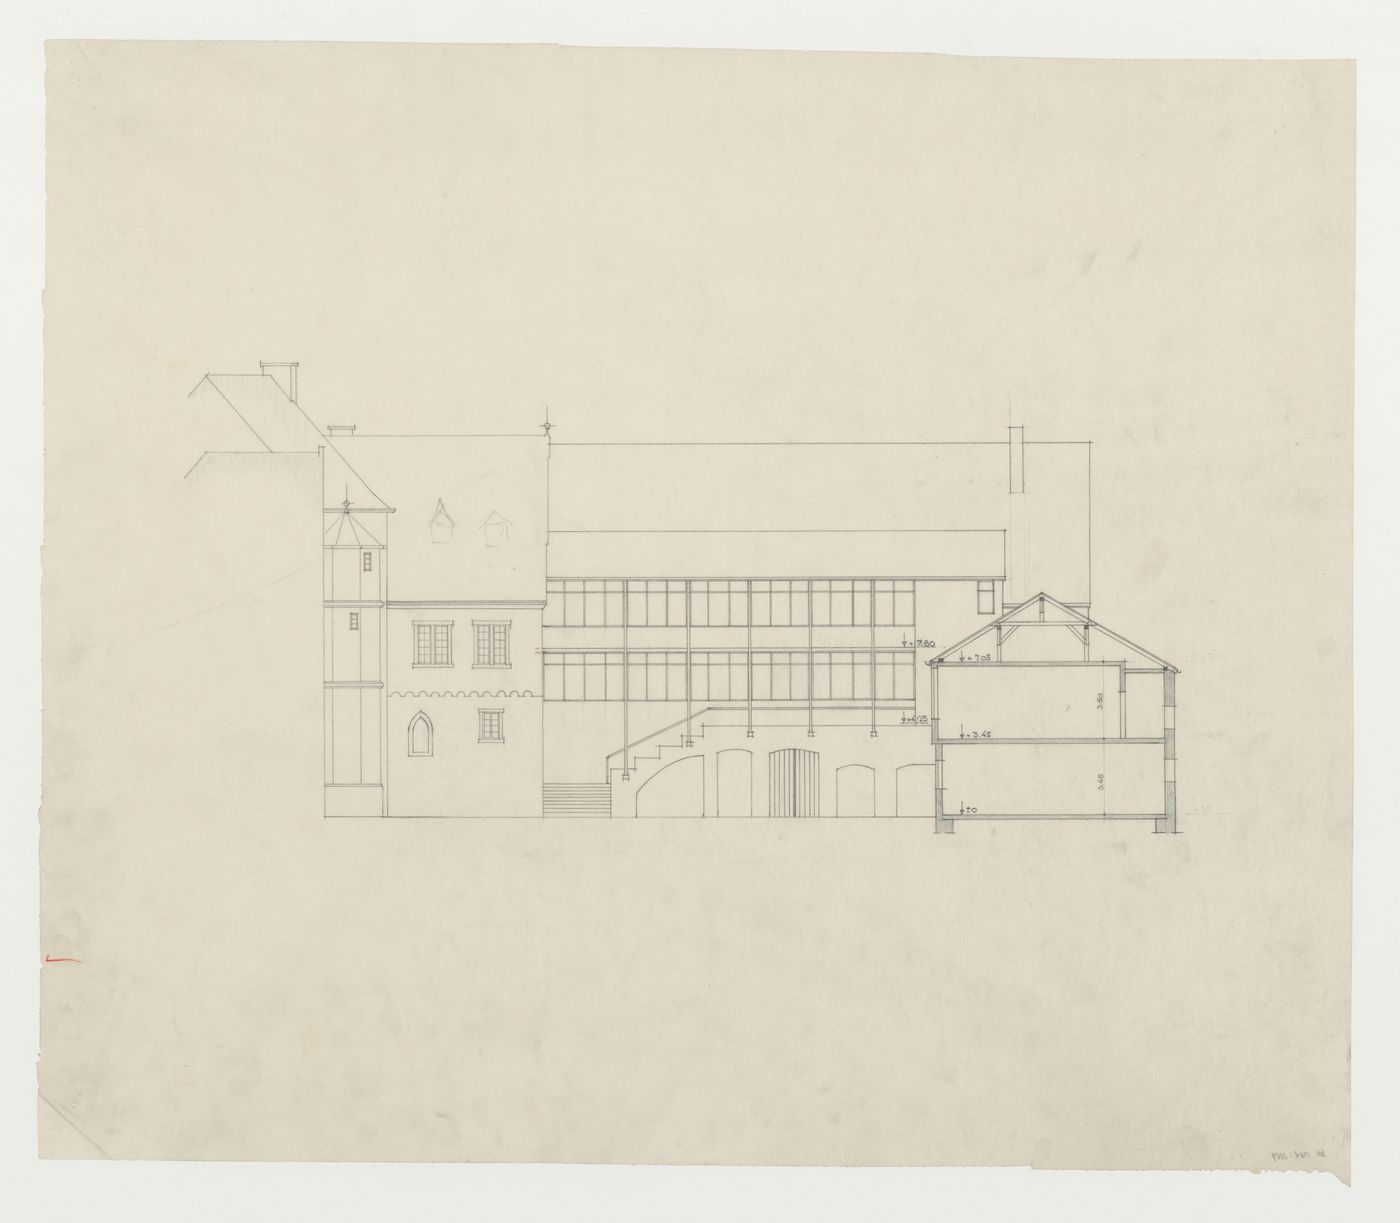 Sectional elevation for an addition to an existing building, possibly a school, Limburg an der Lahn, Germany